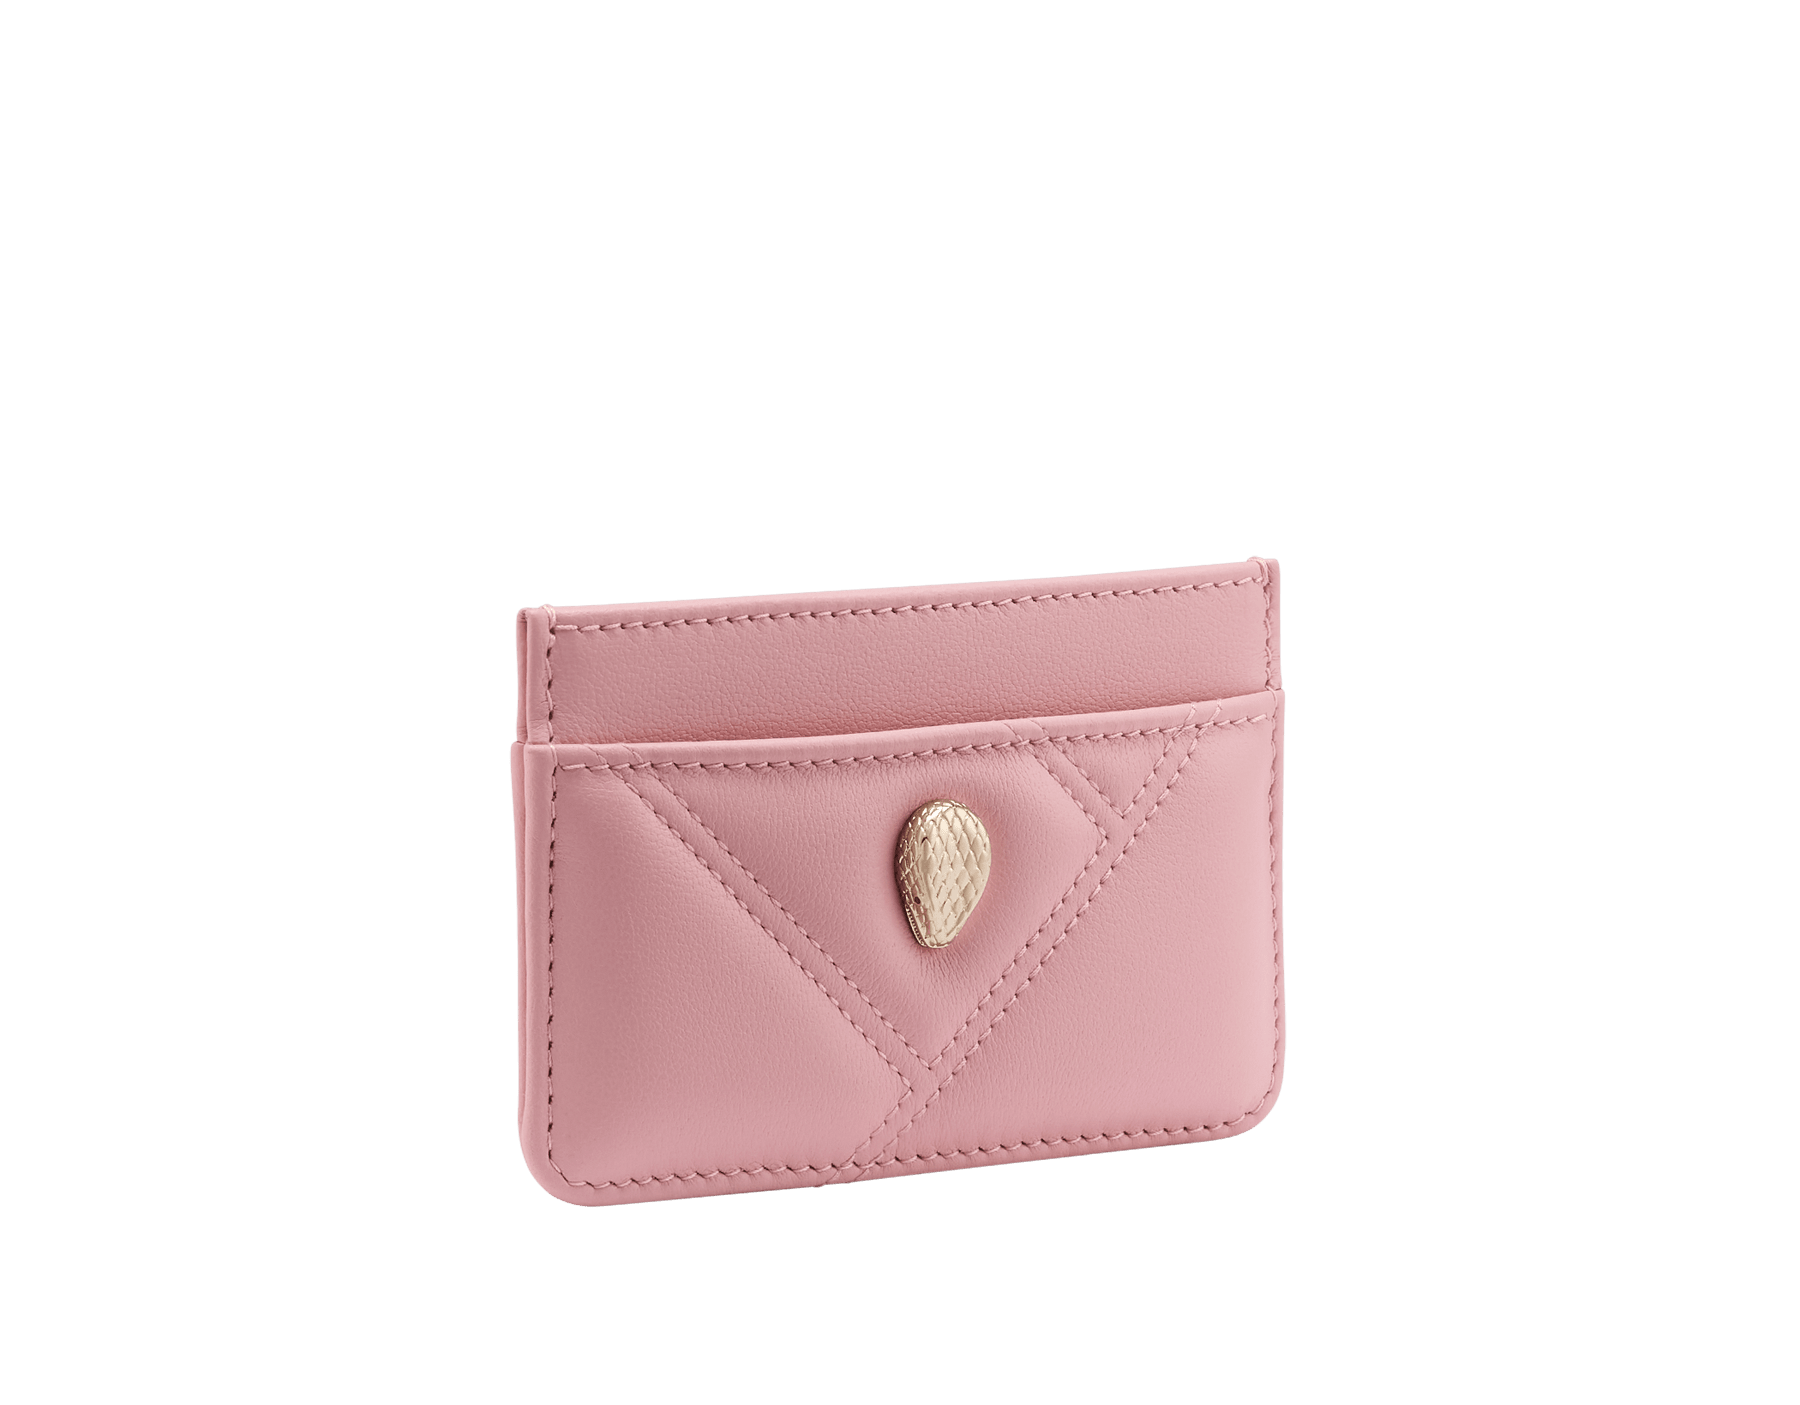 Serpenti Cabochon card holder in sheer amethyst lilac calf leather with a maxi quilted pattern and watercolour opal light blue nappa leather lining. Captivating snakehead rivet in gold-plated brass embellished with red enamel eyes. SCB-CCHOLDERa image 1